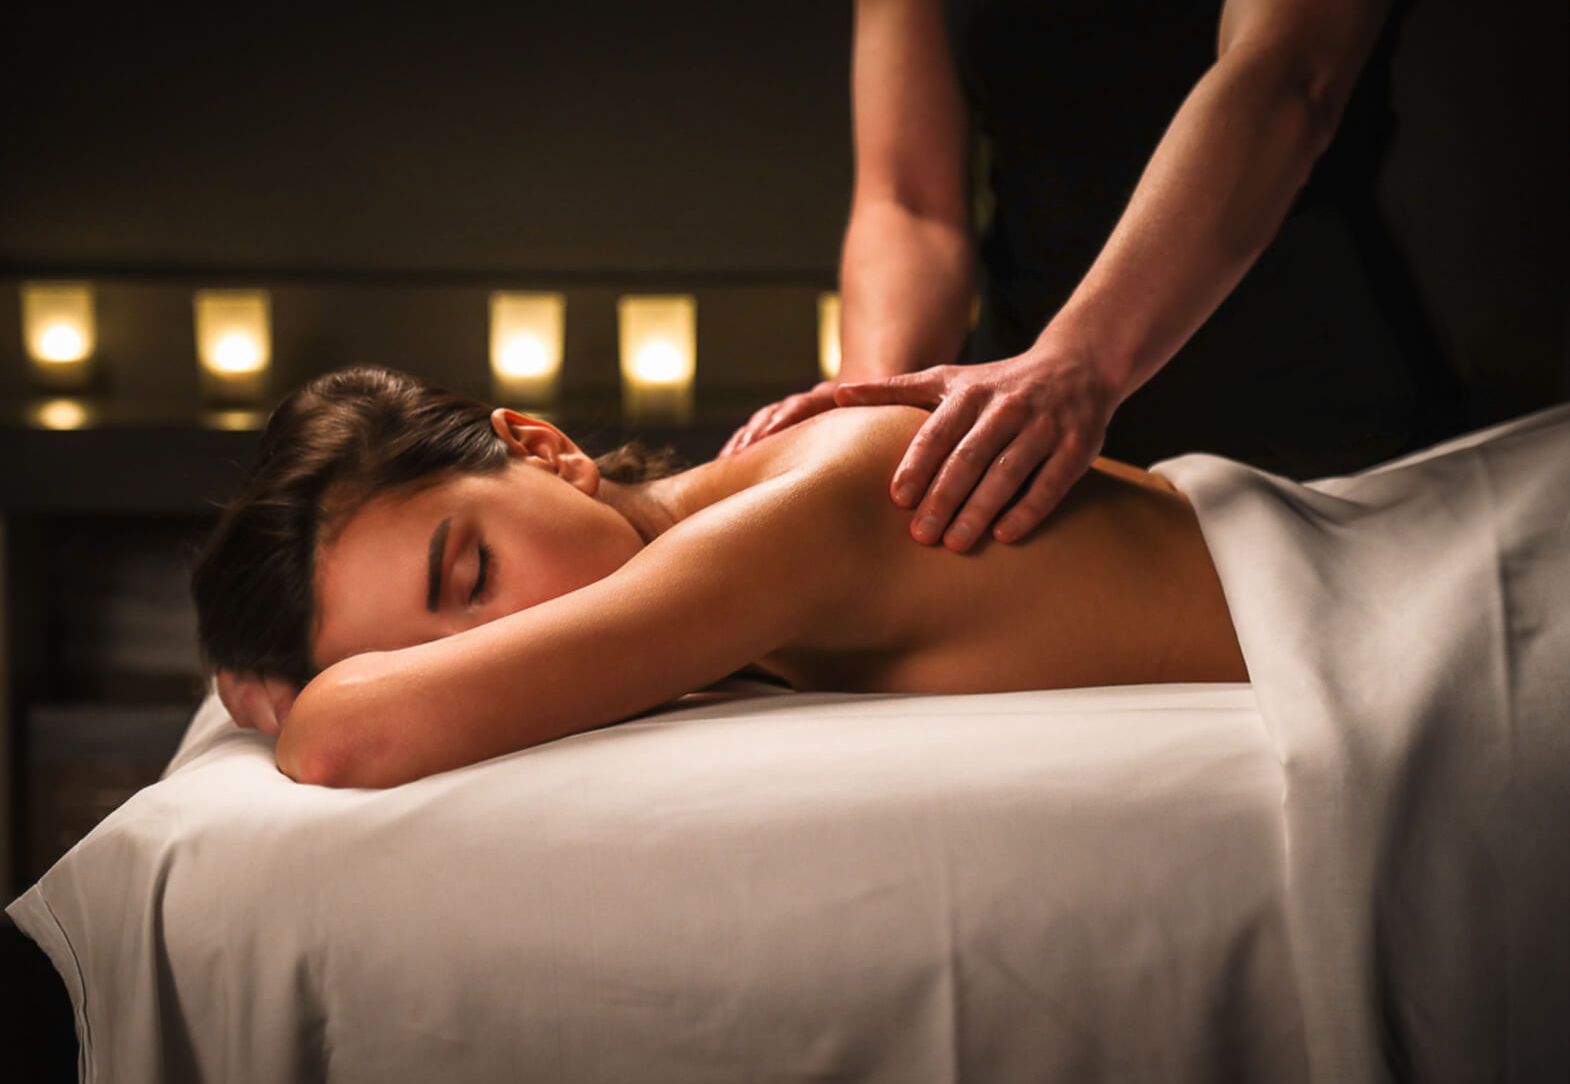  What is central massage?